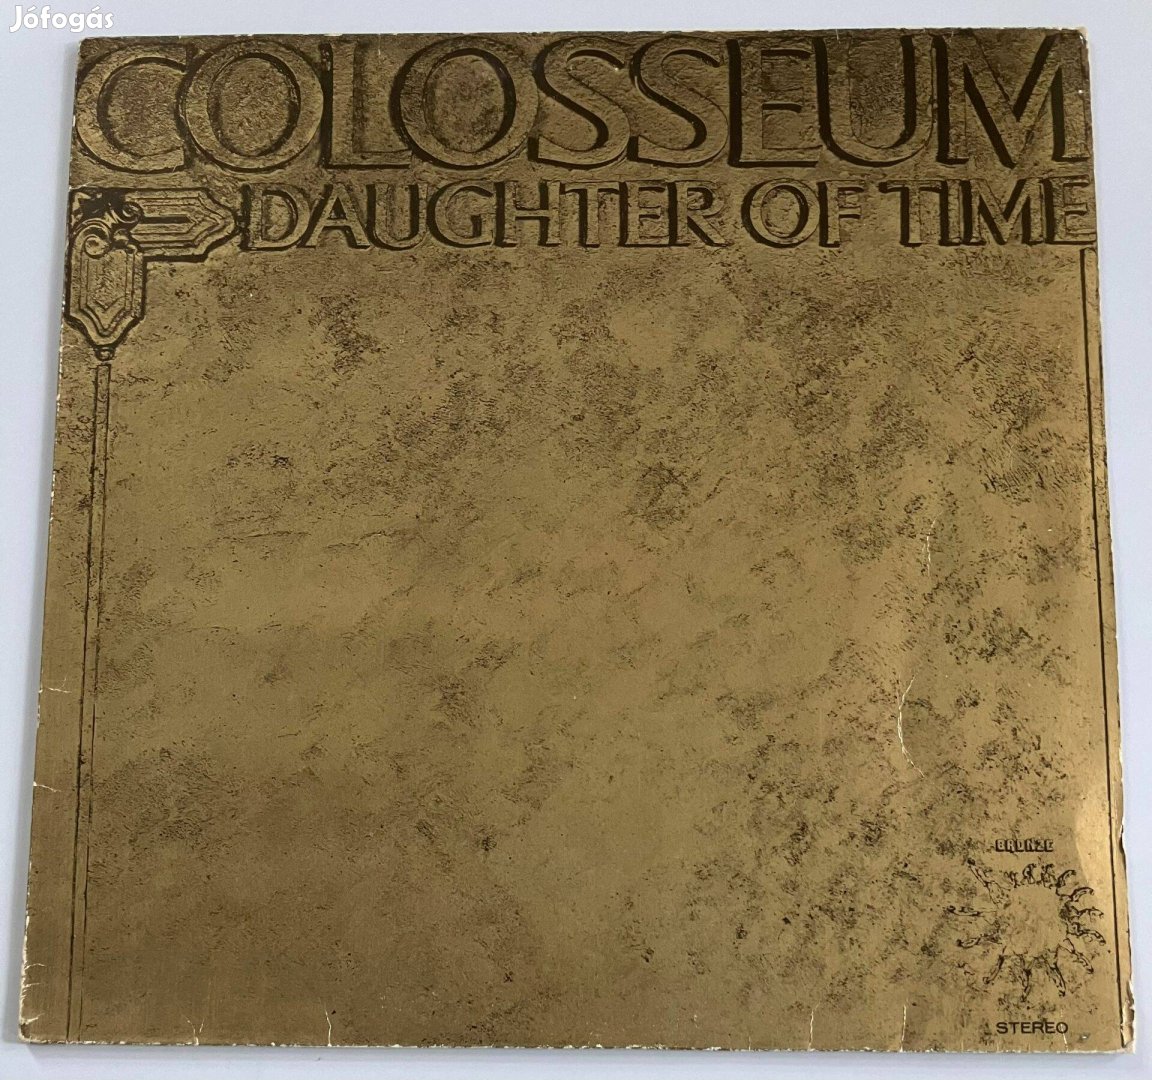 Colosseum - Daughter of Time (német)